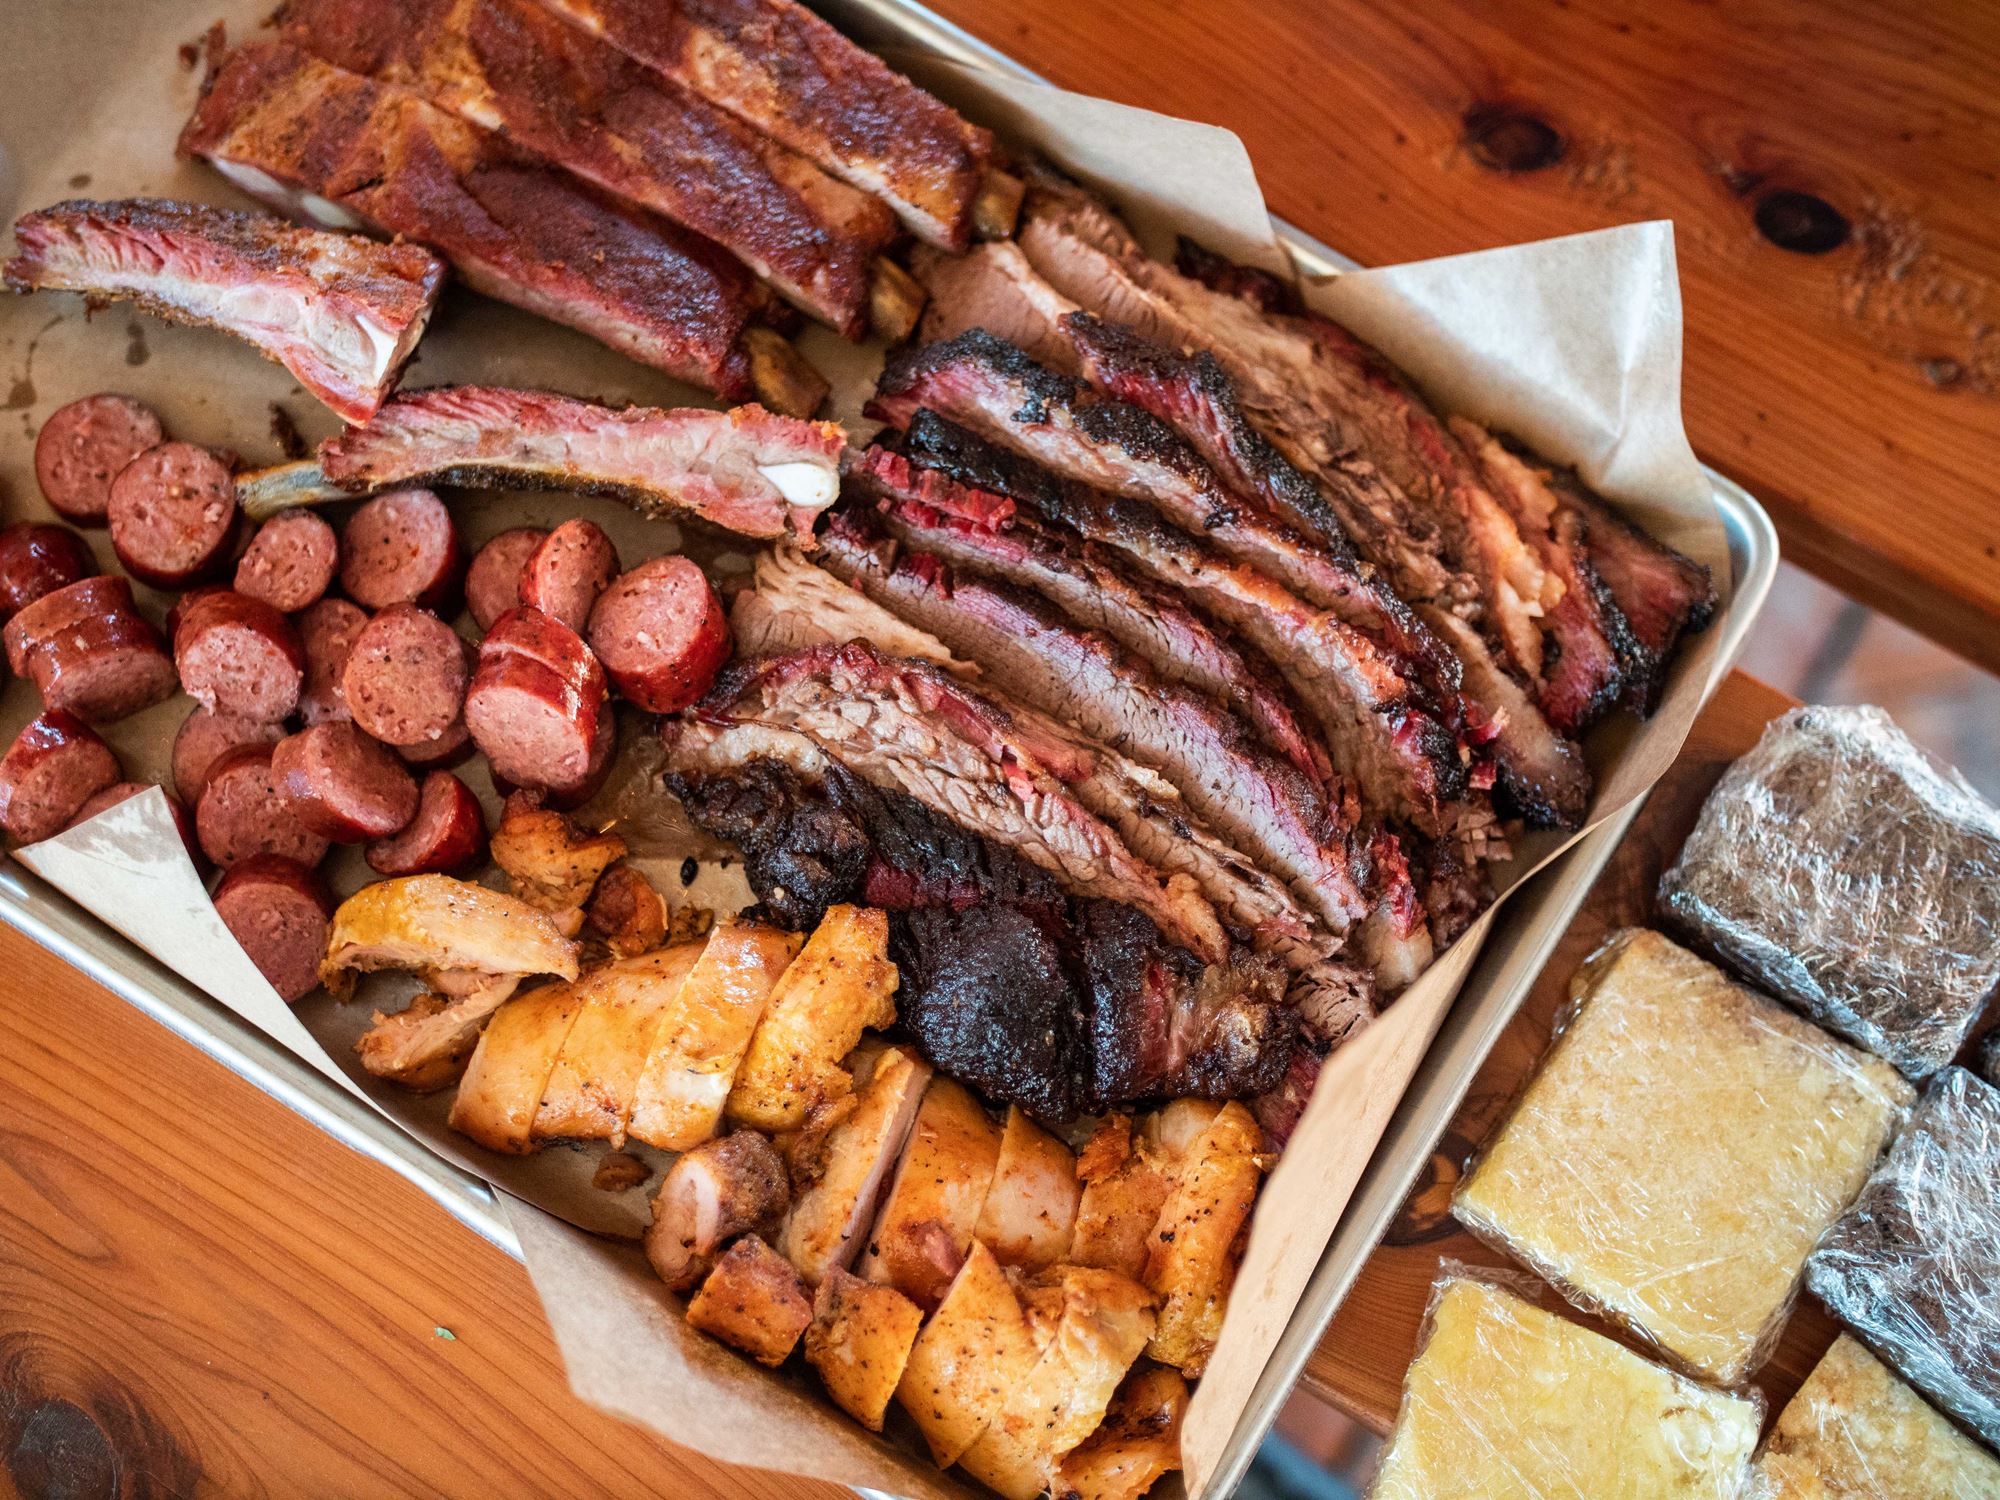 The Best BBQ in the Texas Hill Country - Images.ashx?t=ig&riD=DestinationDrippingSprings&i=PANA7774(1)